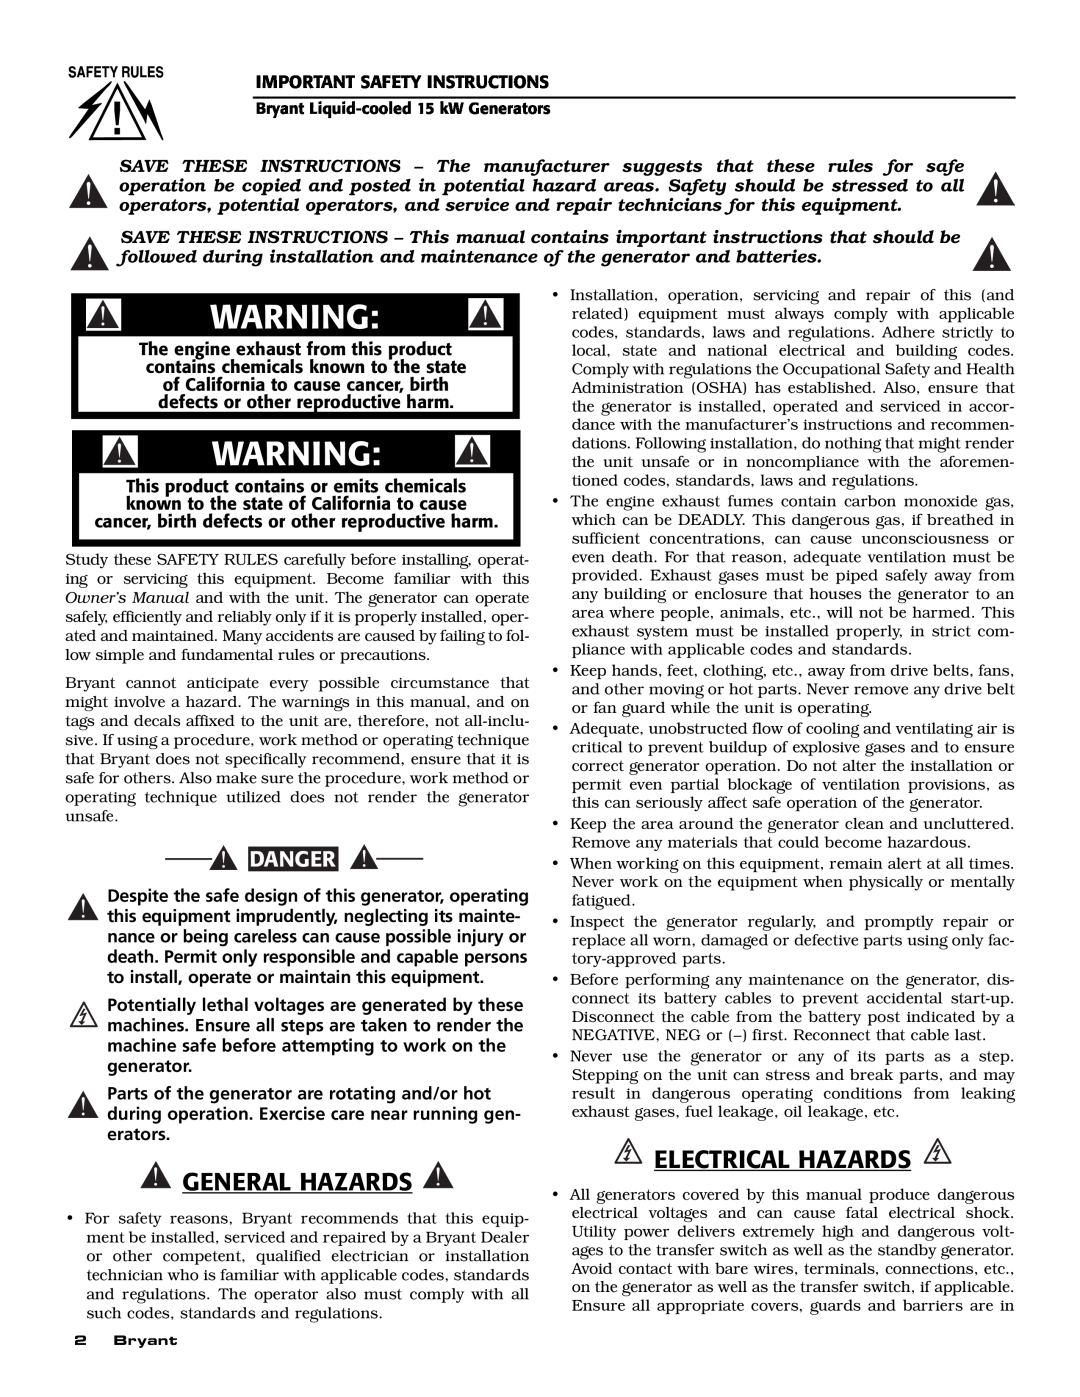 Bryant ASPAS1BBL015 General Hazards, Electrical Hazards, Danger, to install, operate or maintain this equipment 